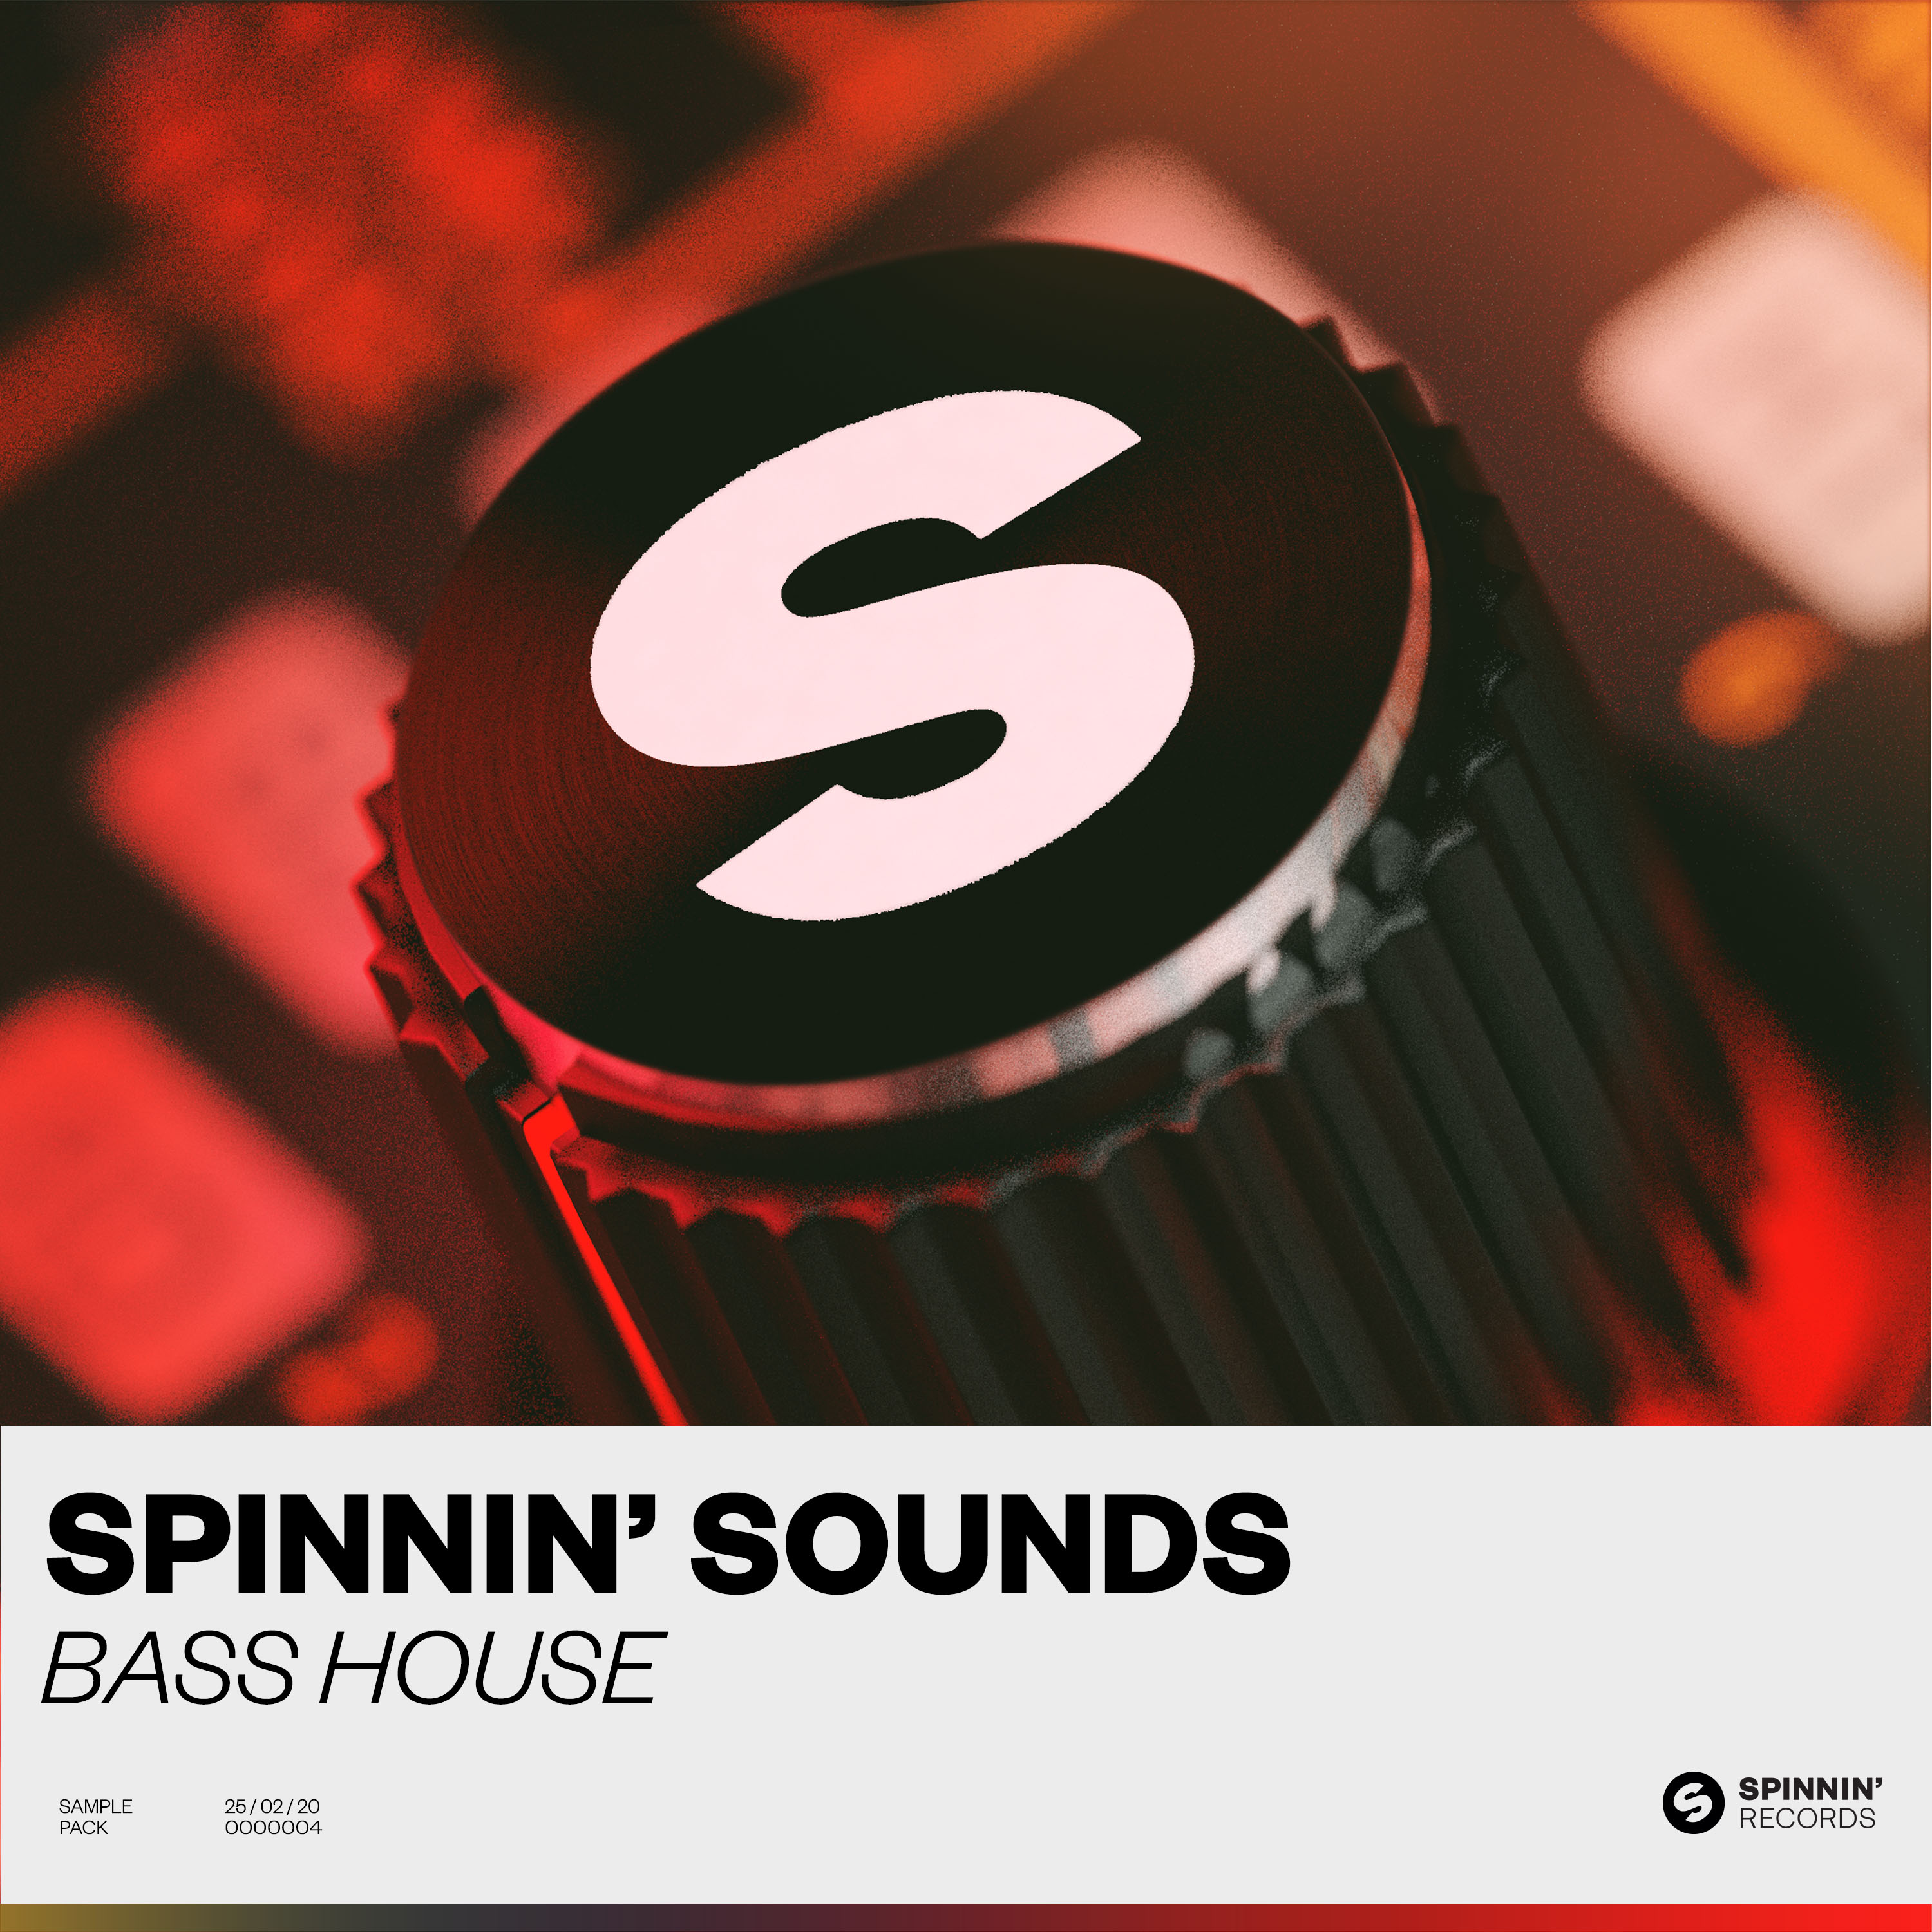 Spinnin' Records brings new sample pack: Bass House